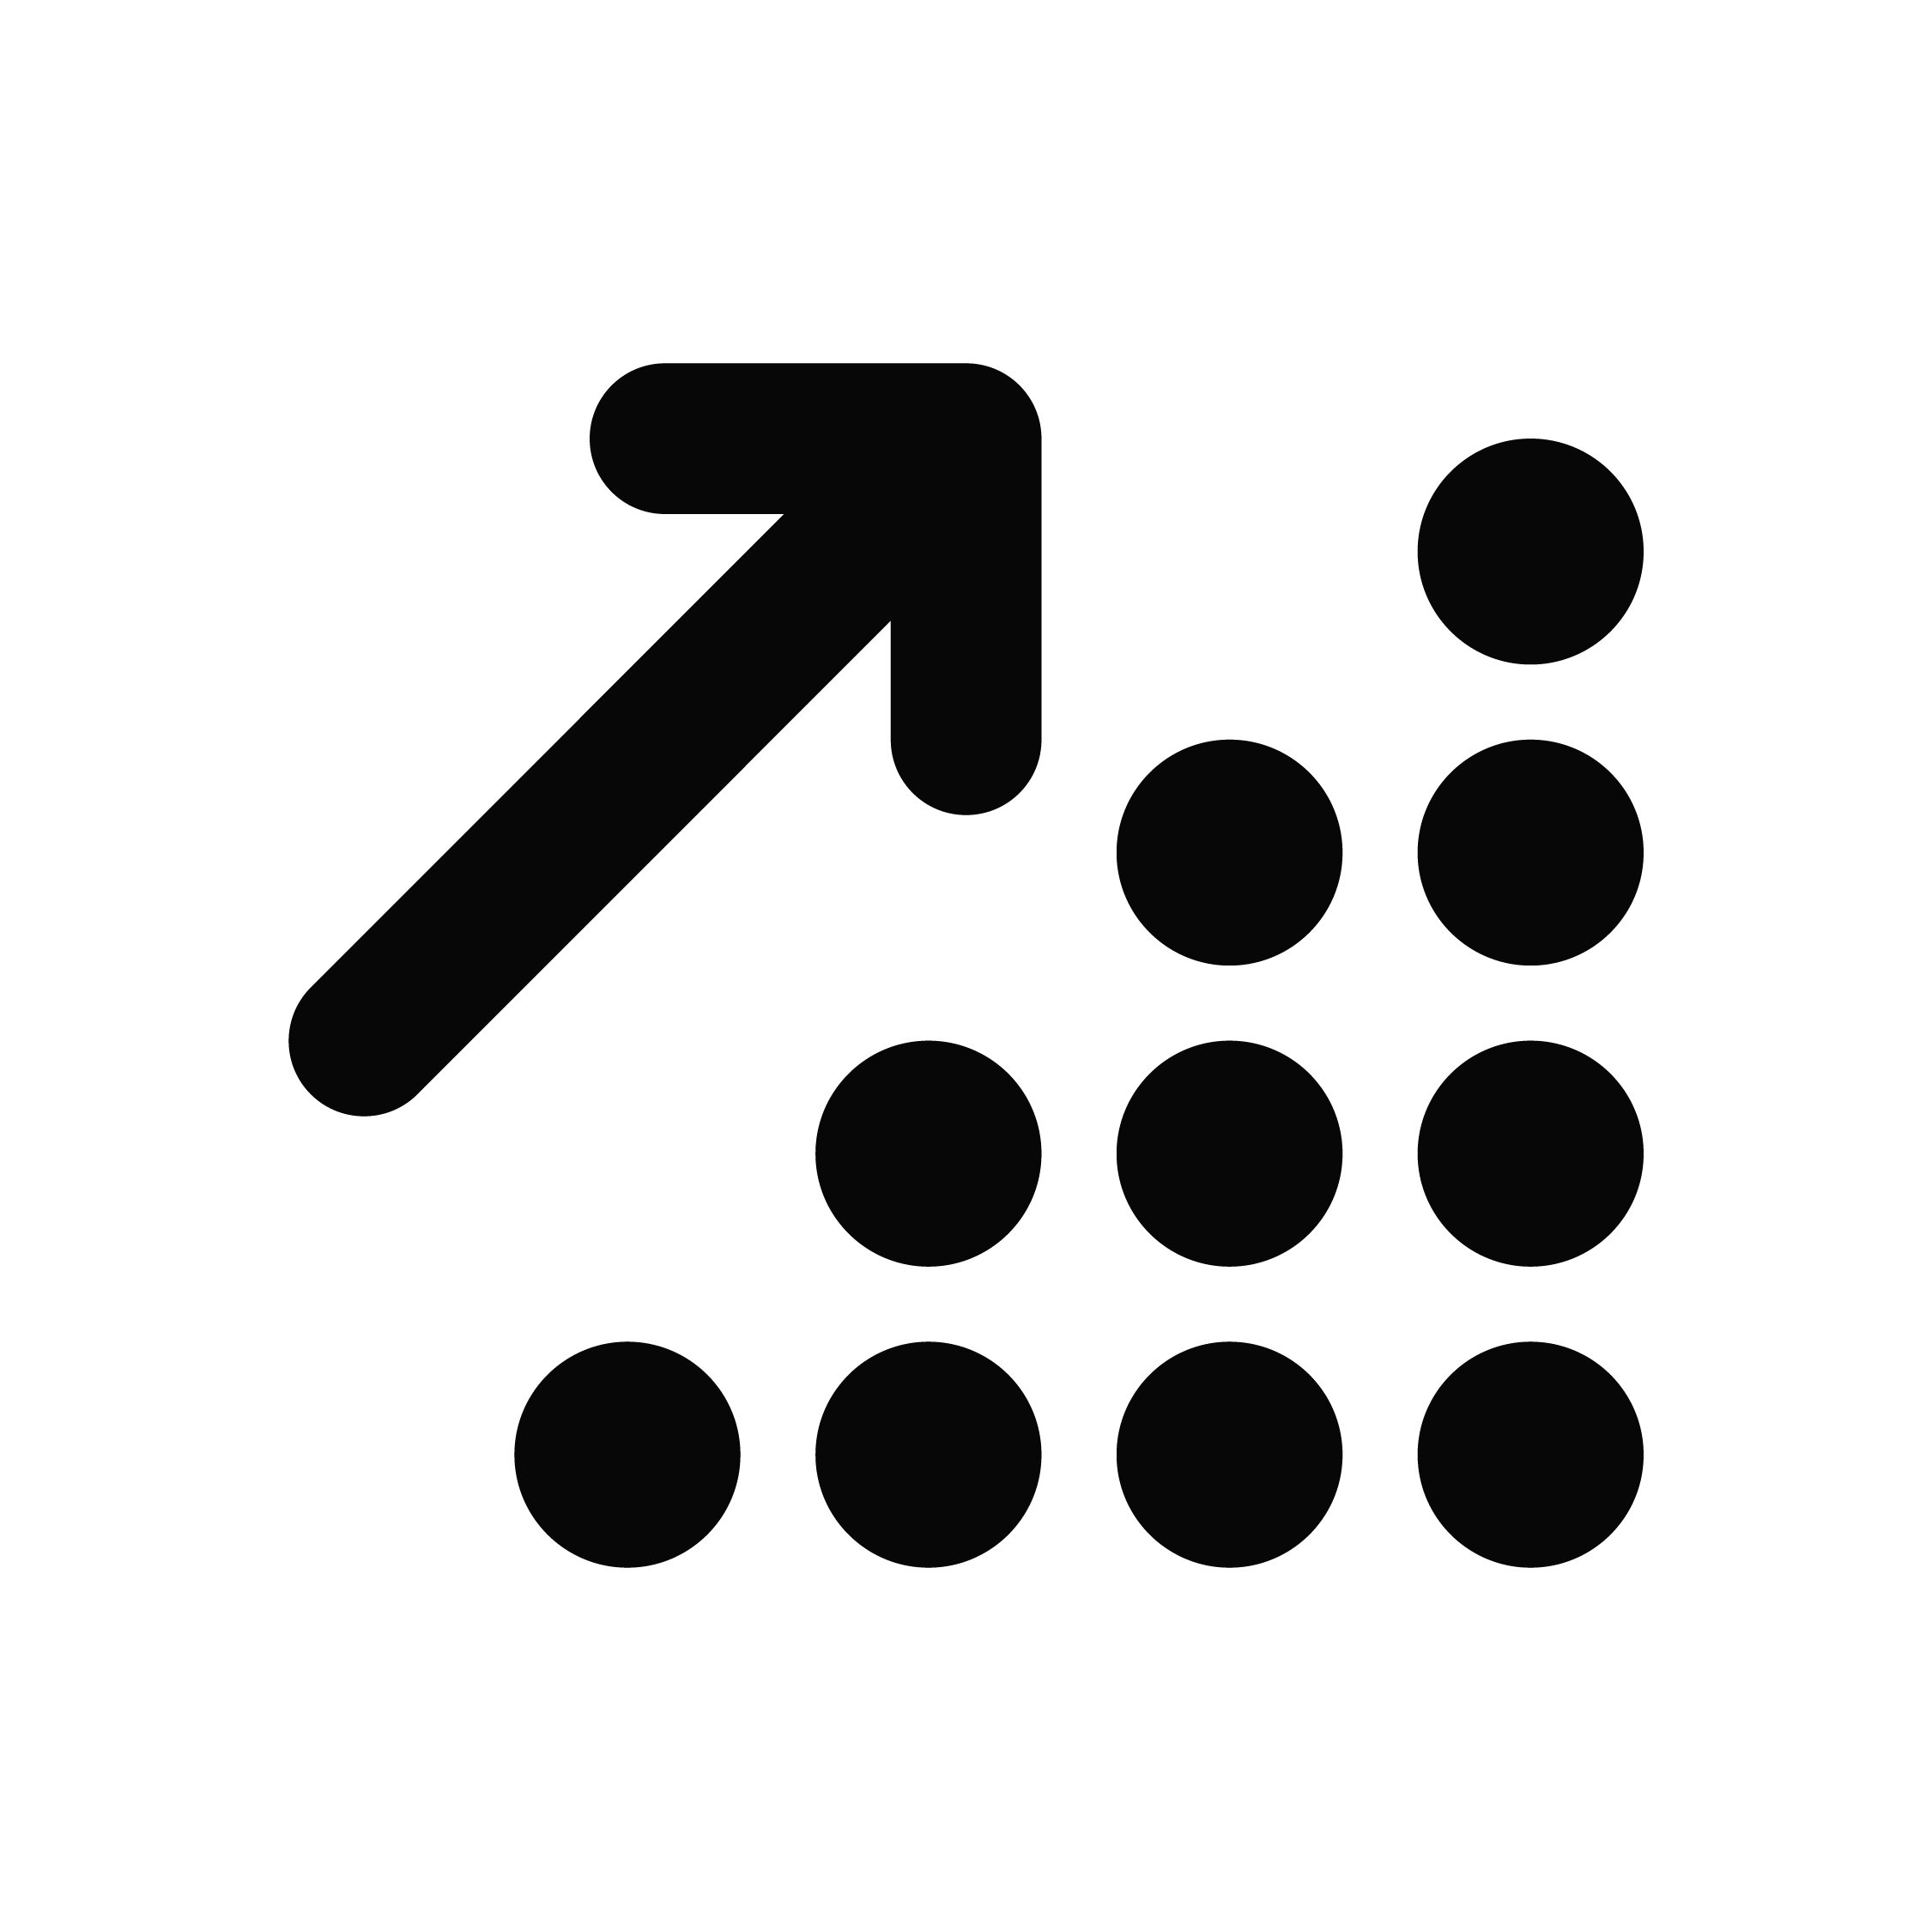 Black Arrow pointing upwards with a staircase of black dots